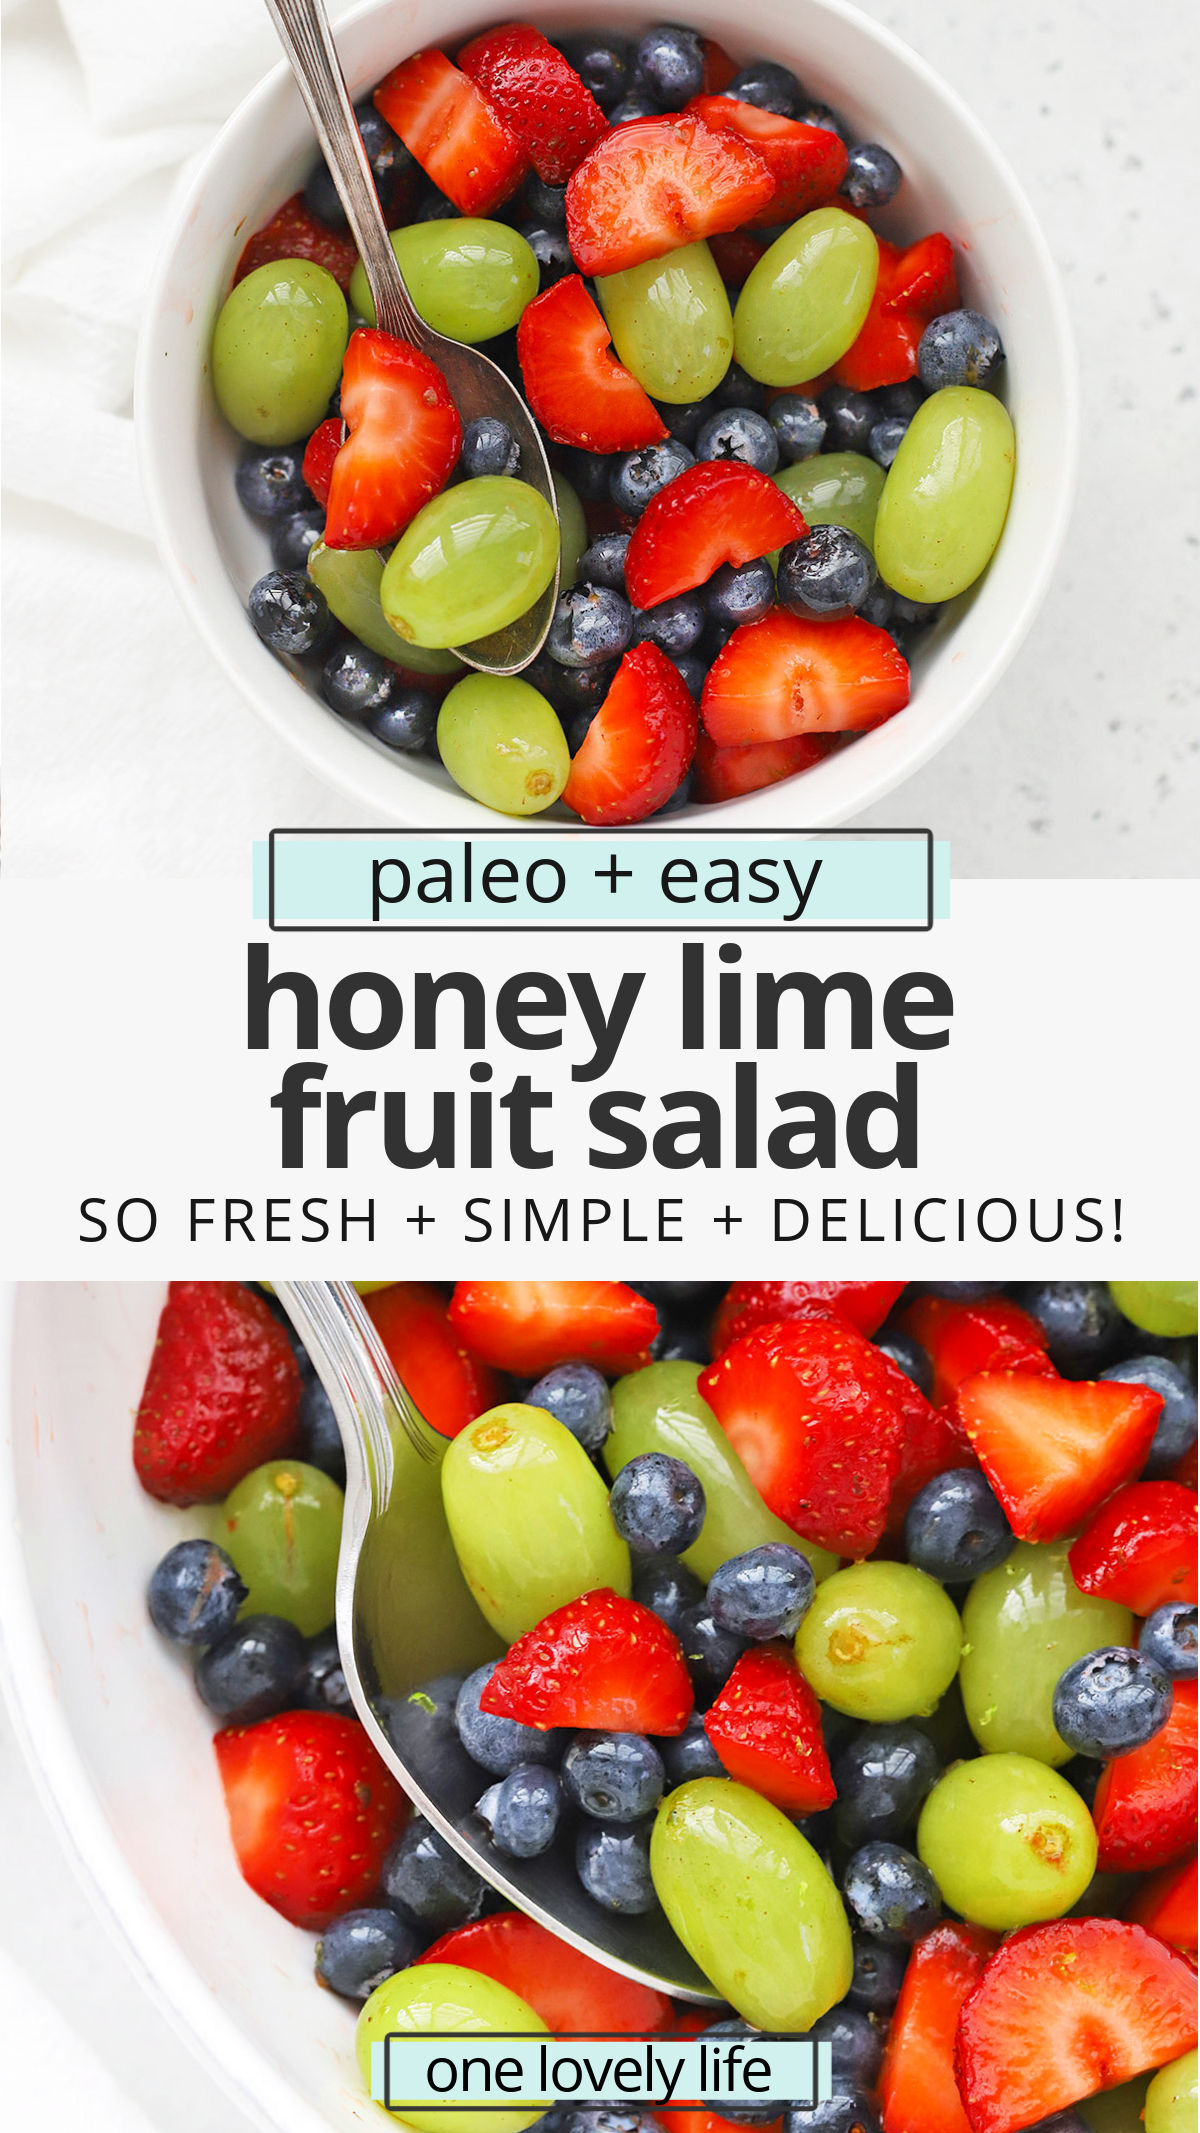 Honey Lime Fruit Salad is my favorite side dish. It's perfect for weeknight dinners, baby or wedding showers, barbecues, and more! // honey lime fruit salad recipe // healthy fruit salad // paleo fruit salad // fruit salad recipe // honey lime dressing